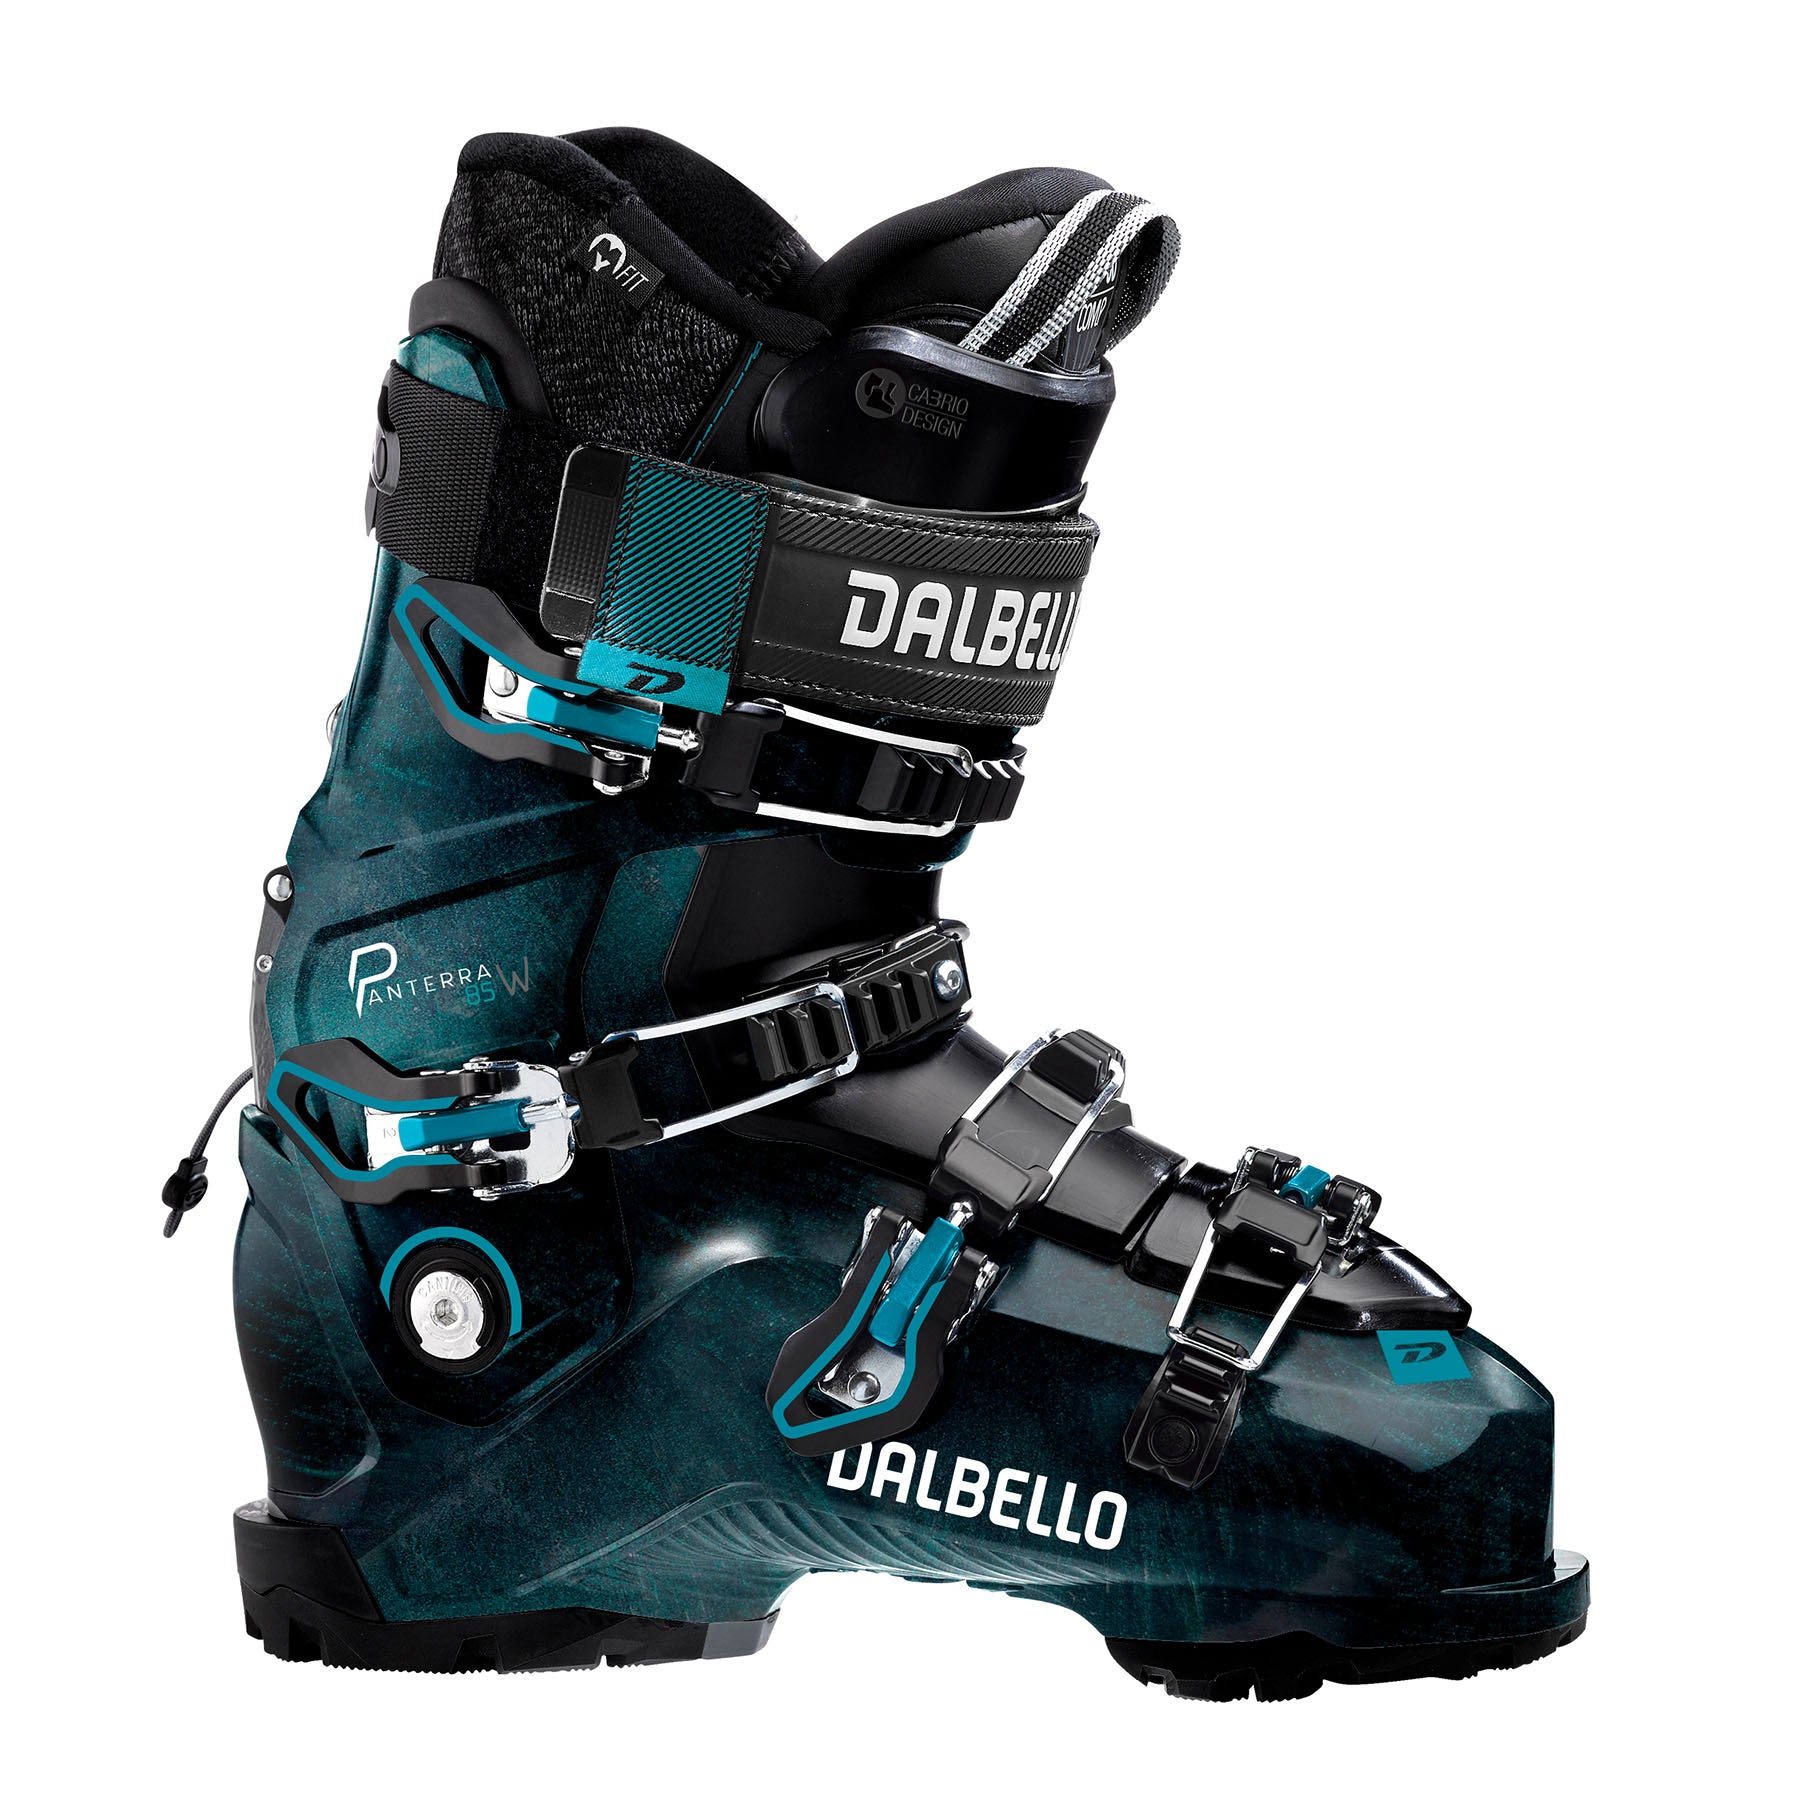 Hero image featuring a side angle shot of the Dalbello Panterra 85 Women's ski boot in black with opal highlights and silver trim.